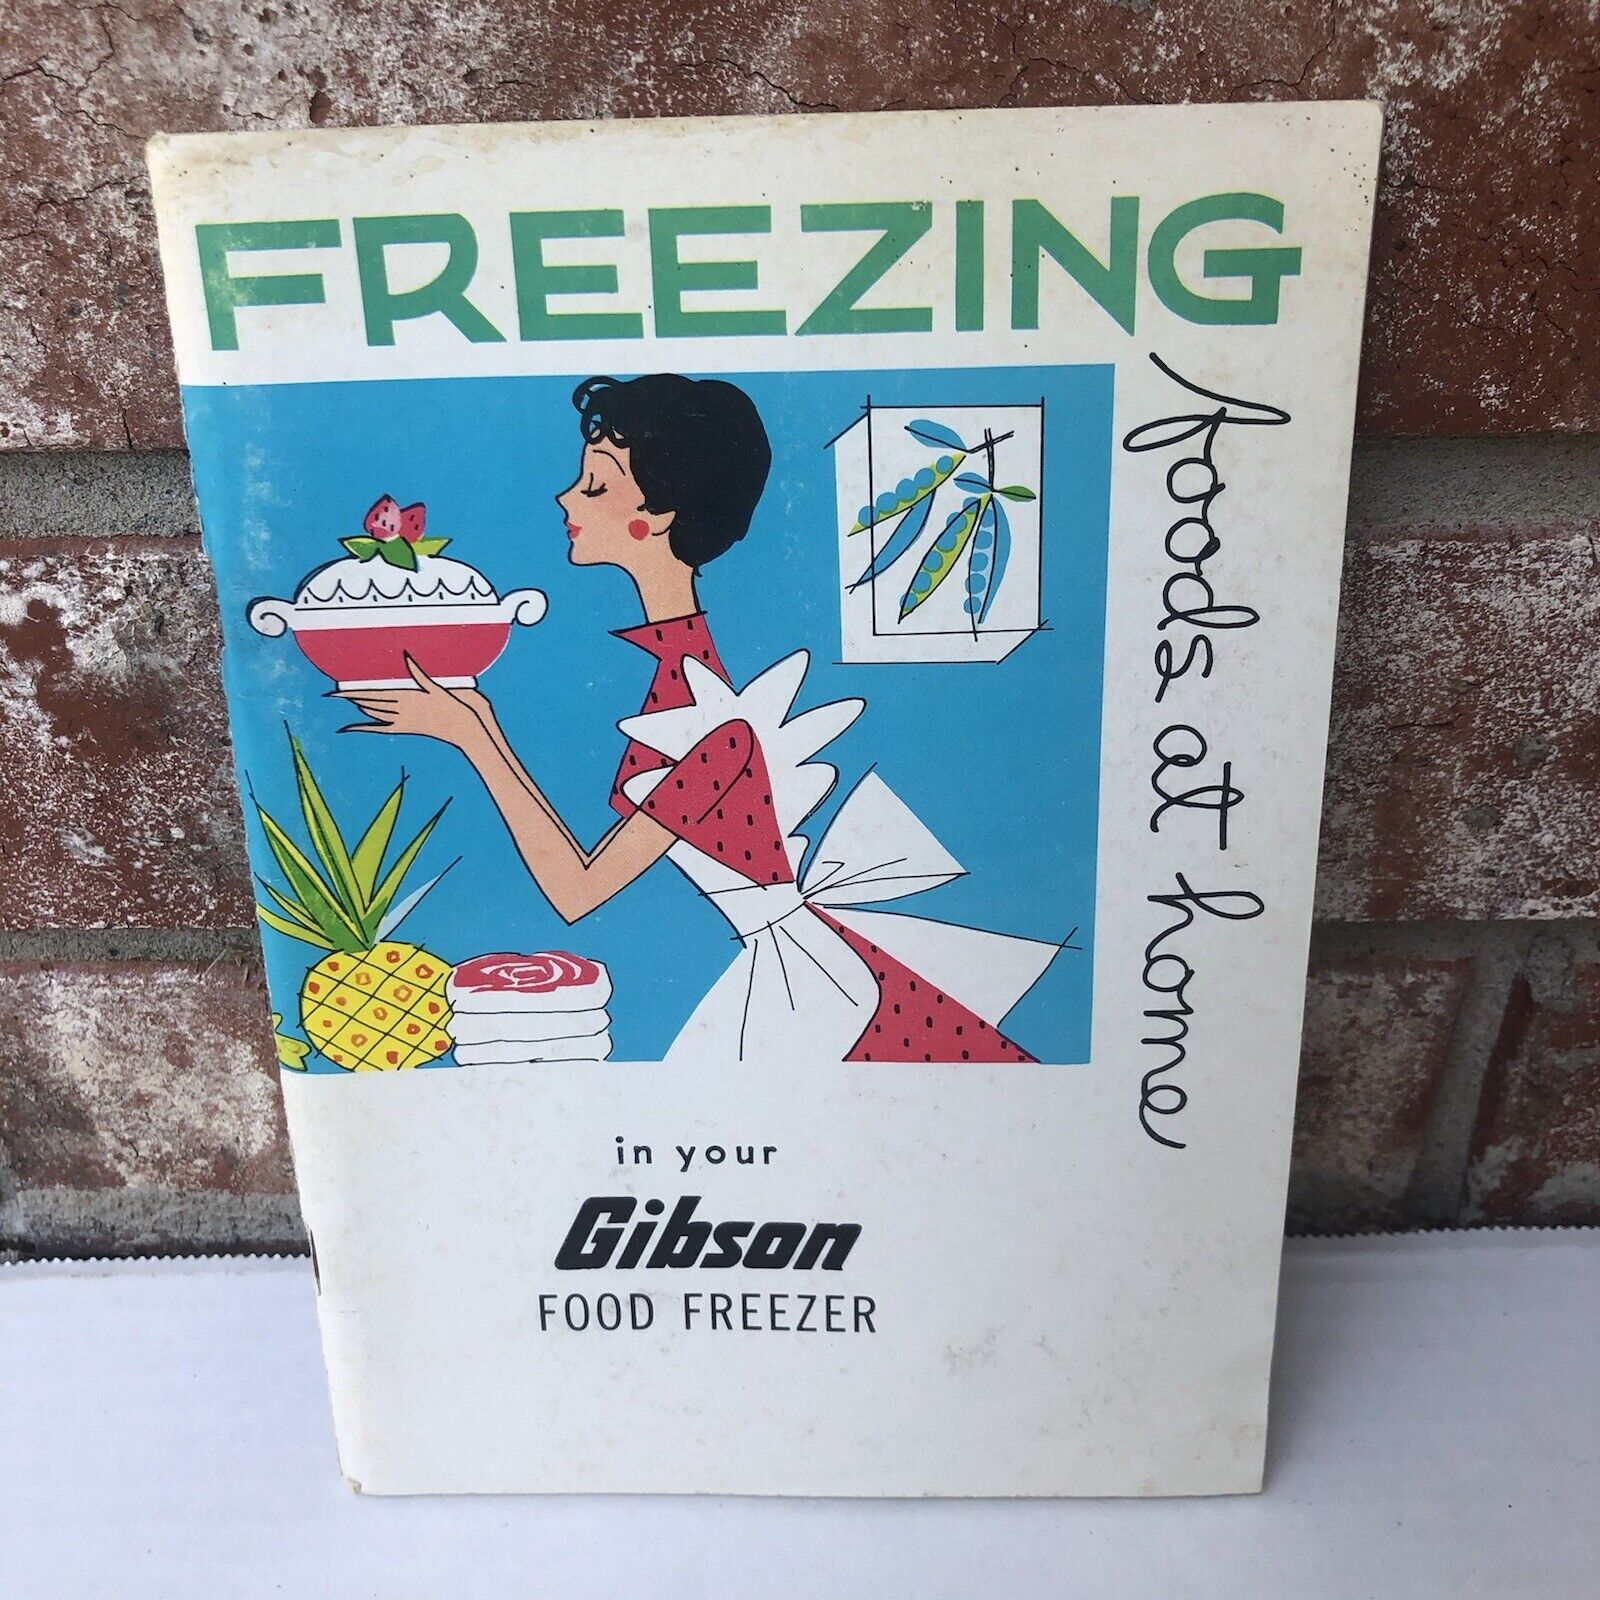 Freezing Foods At Home In Your Gibson Food Freezer Manual Cookbook 1963 Vintage